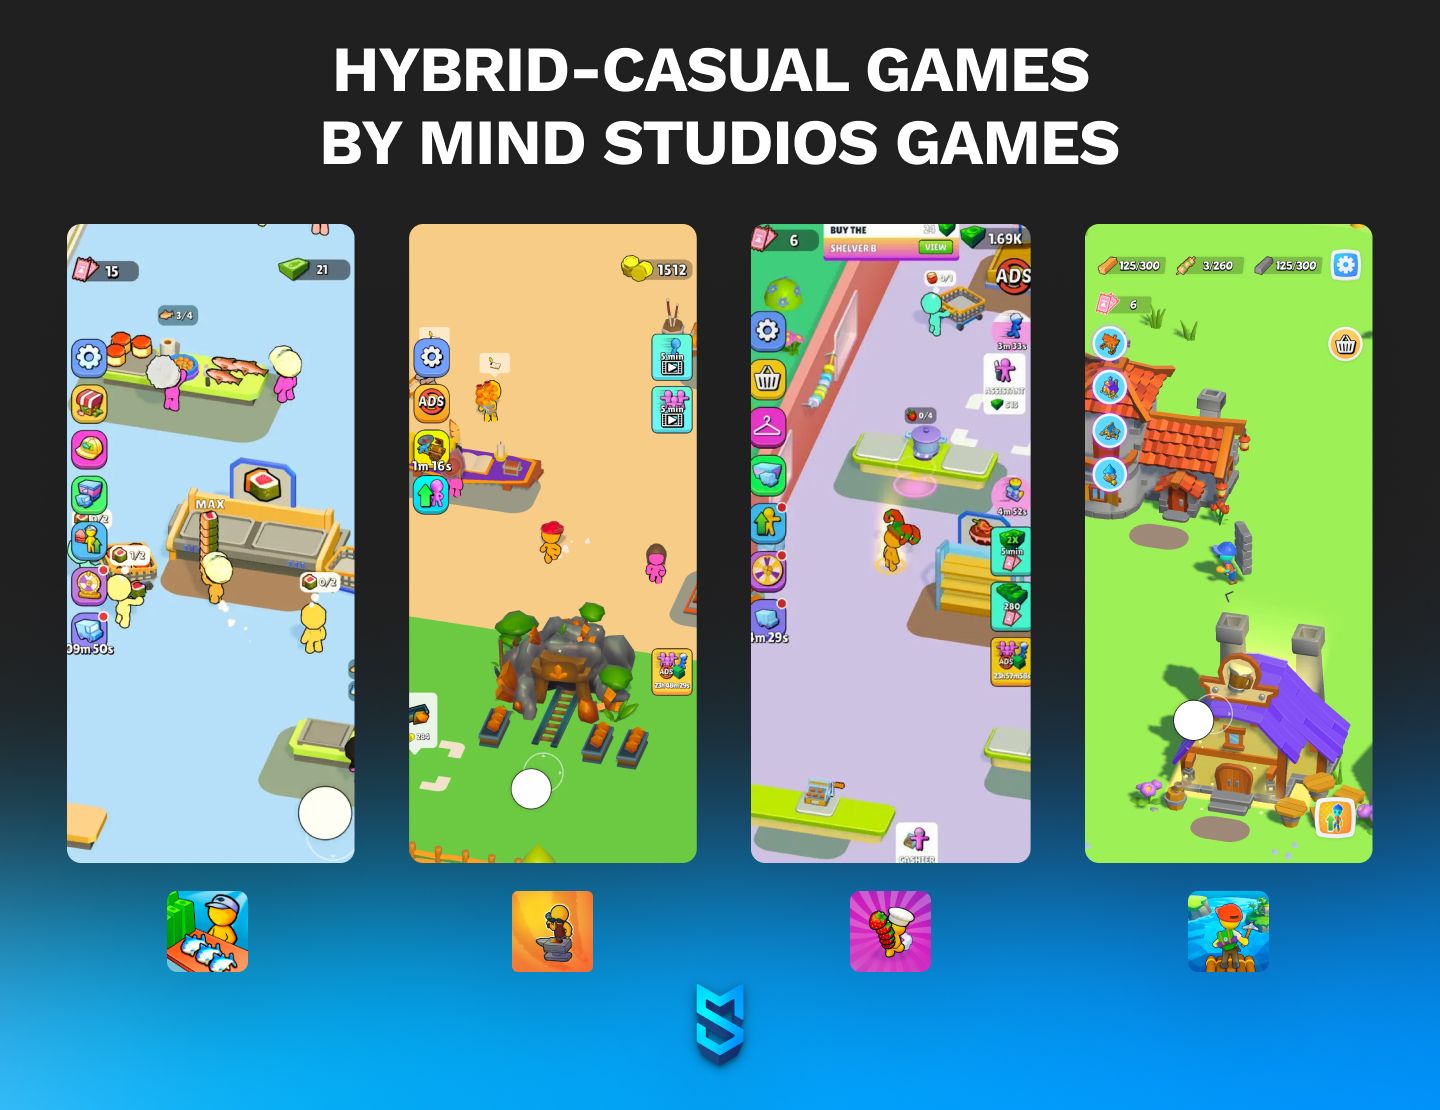 Hybrid-casual games by Mind Studios Games